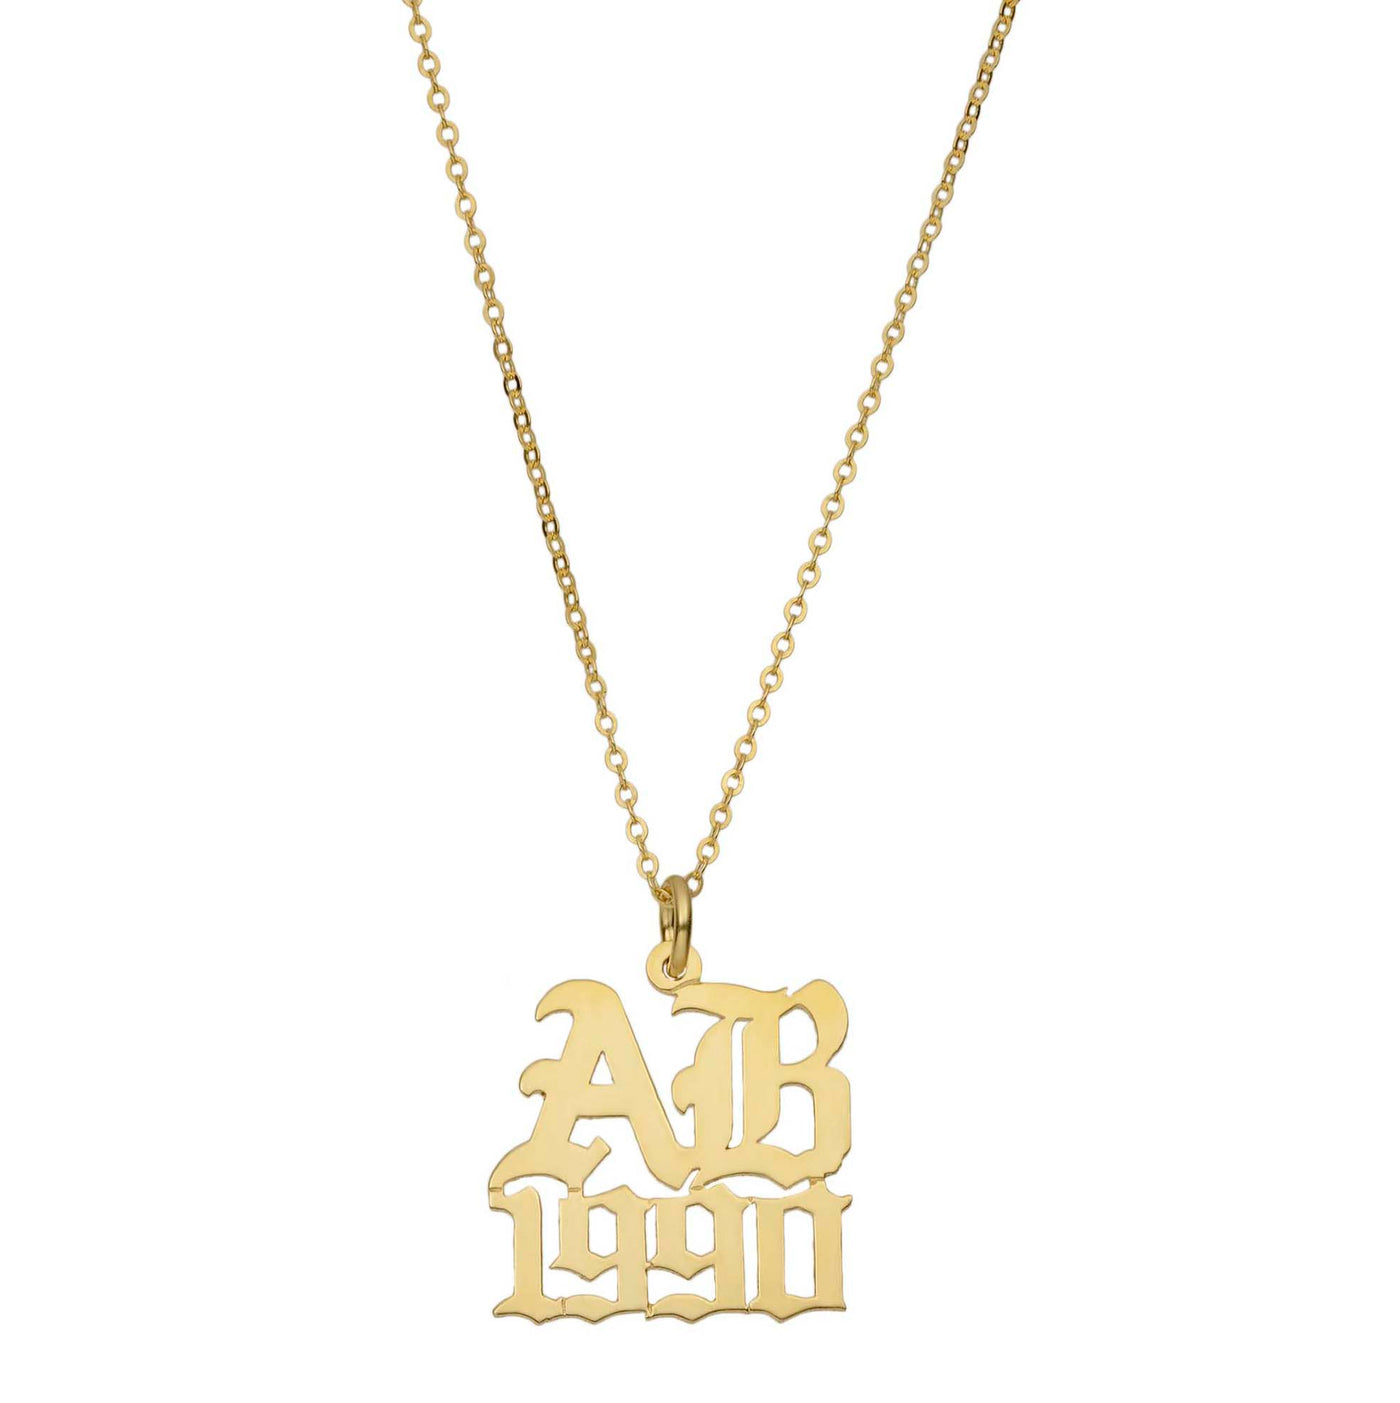 Ladies Name Plate Necklace 14K Gold - Style 175